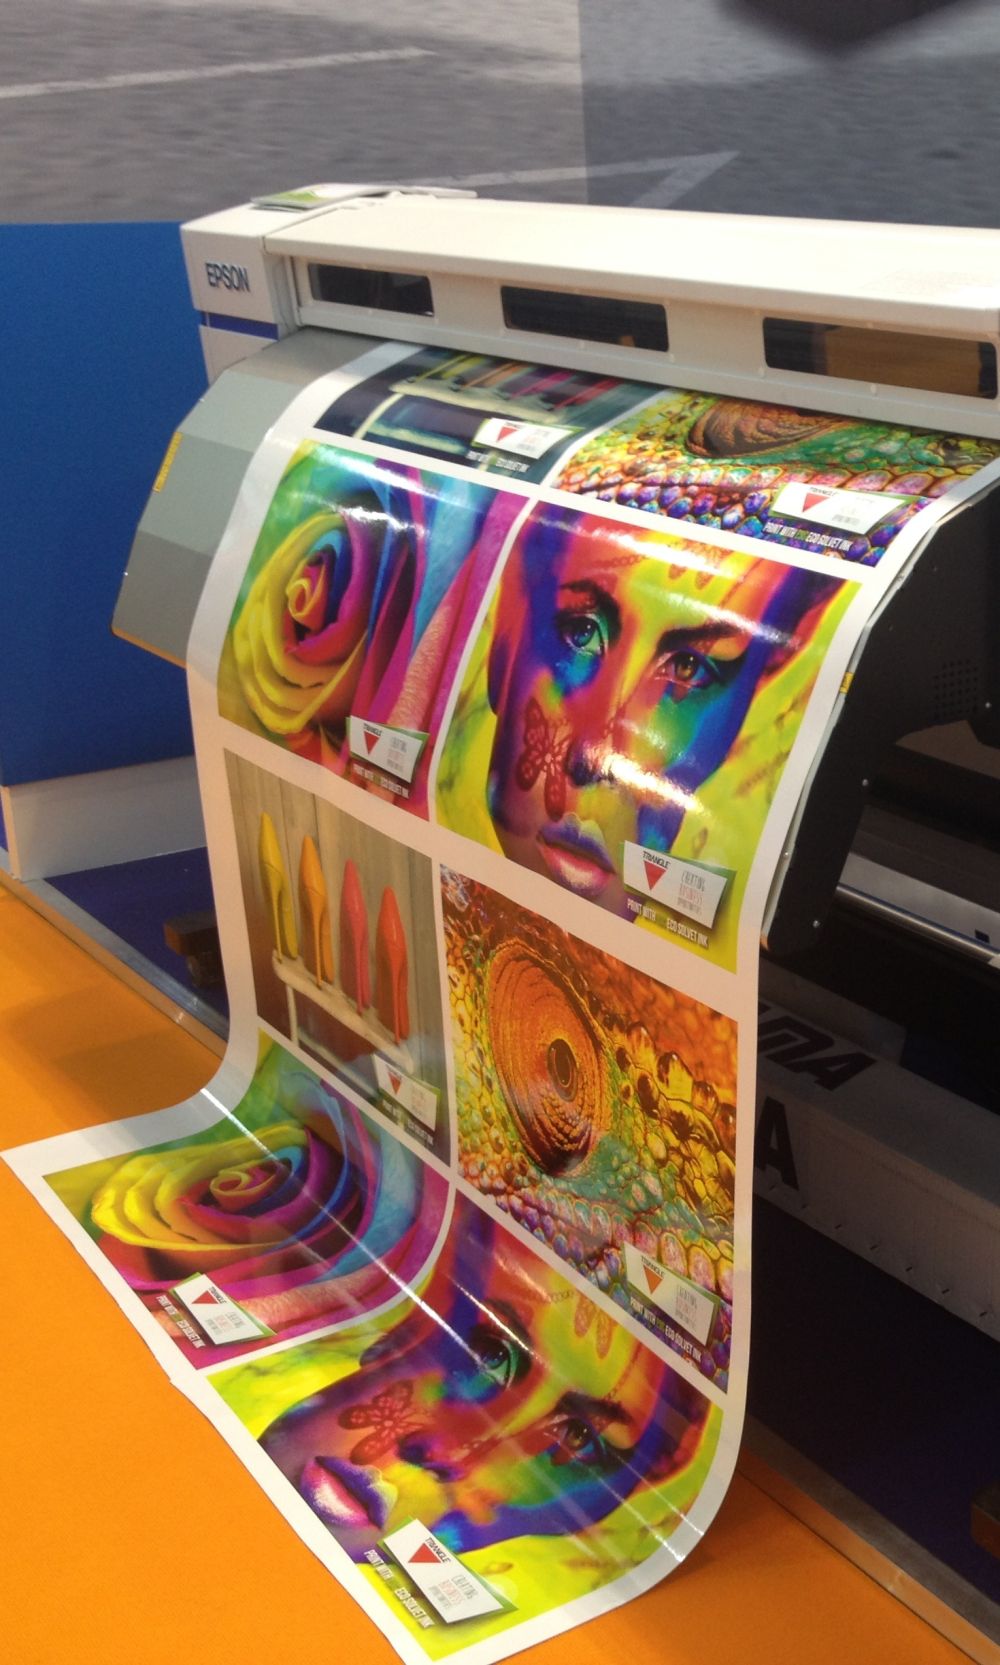 Technology Color Machine Laser Ink Printing 766632 Pxhere Com